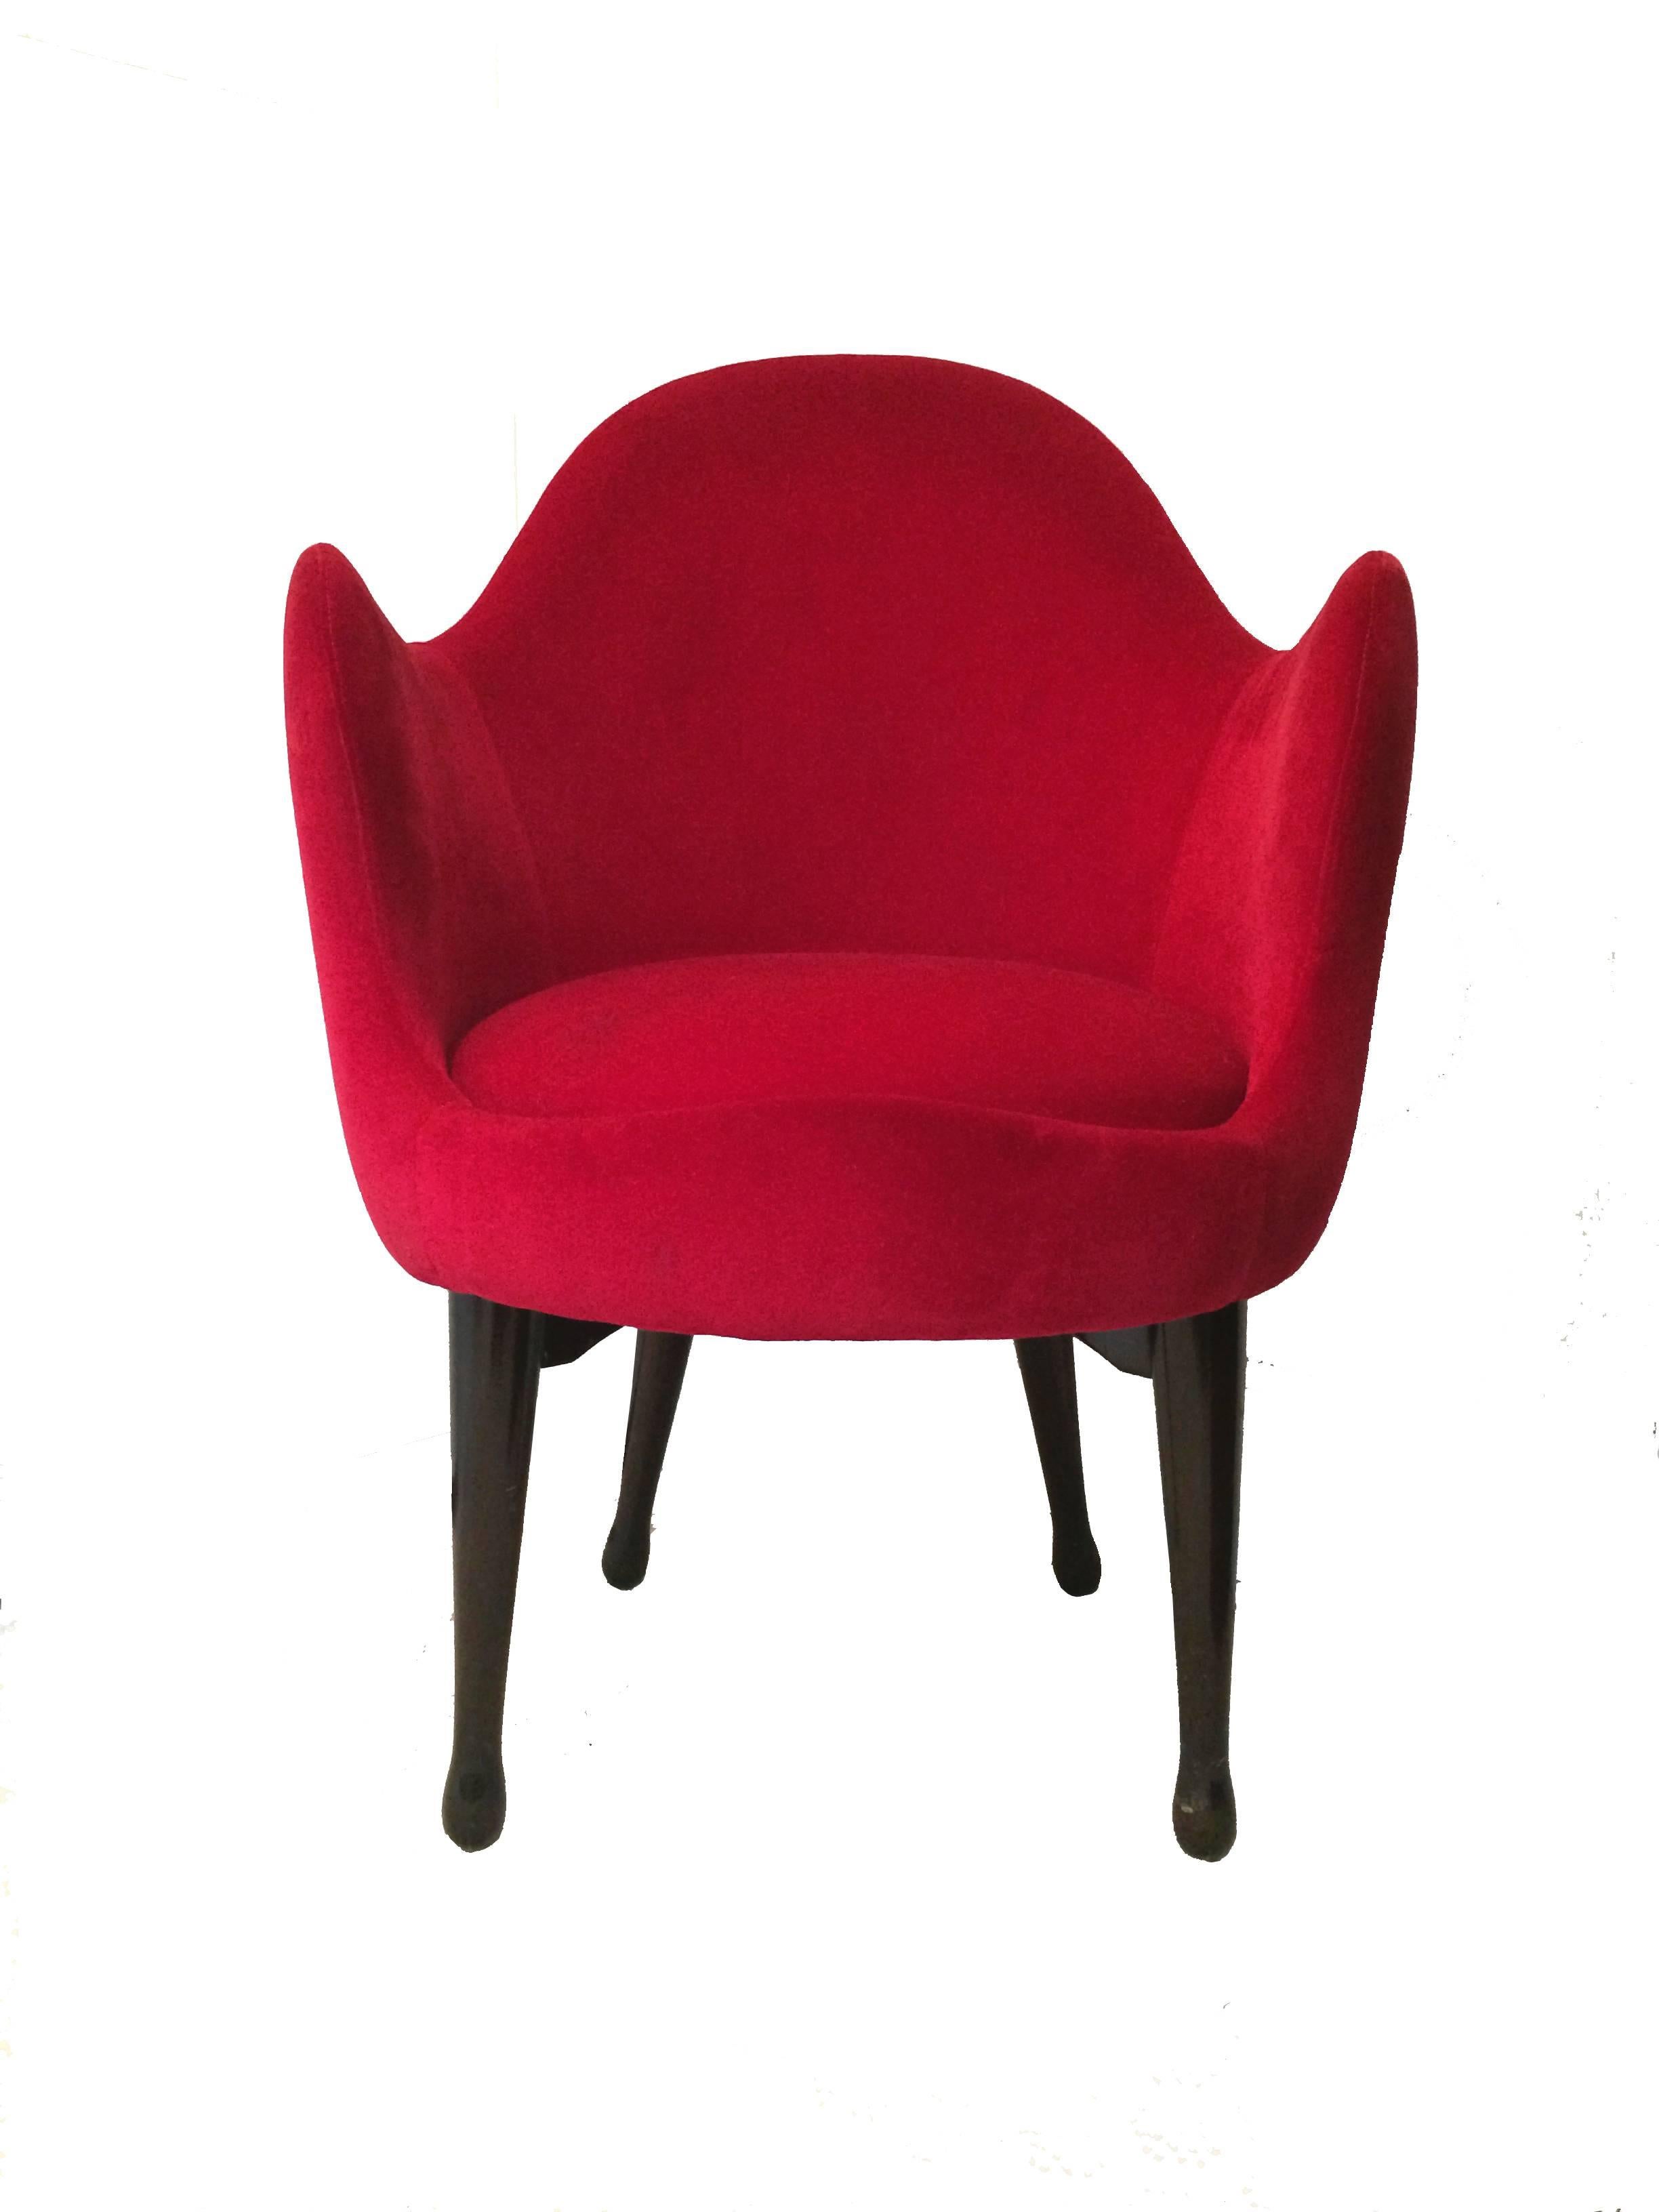 A club chair designed by Elizabeth Garouste and Mattia Bonetti with a curvaceous Silhouette upholstered in a red velvet sitting on tapered wood legs. 
The chair was designed for an Avenue Montaigne store during the height of their work in the